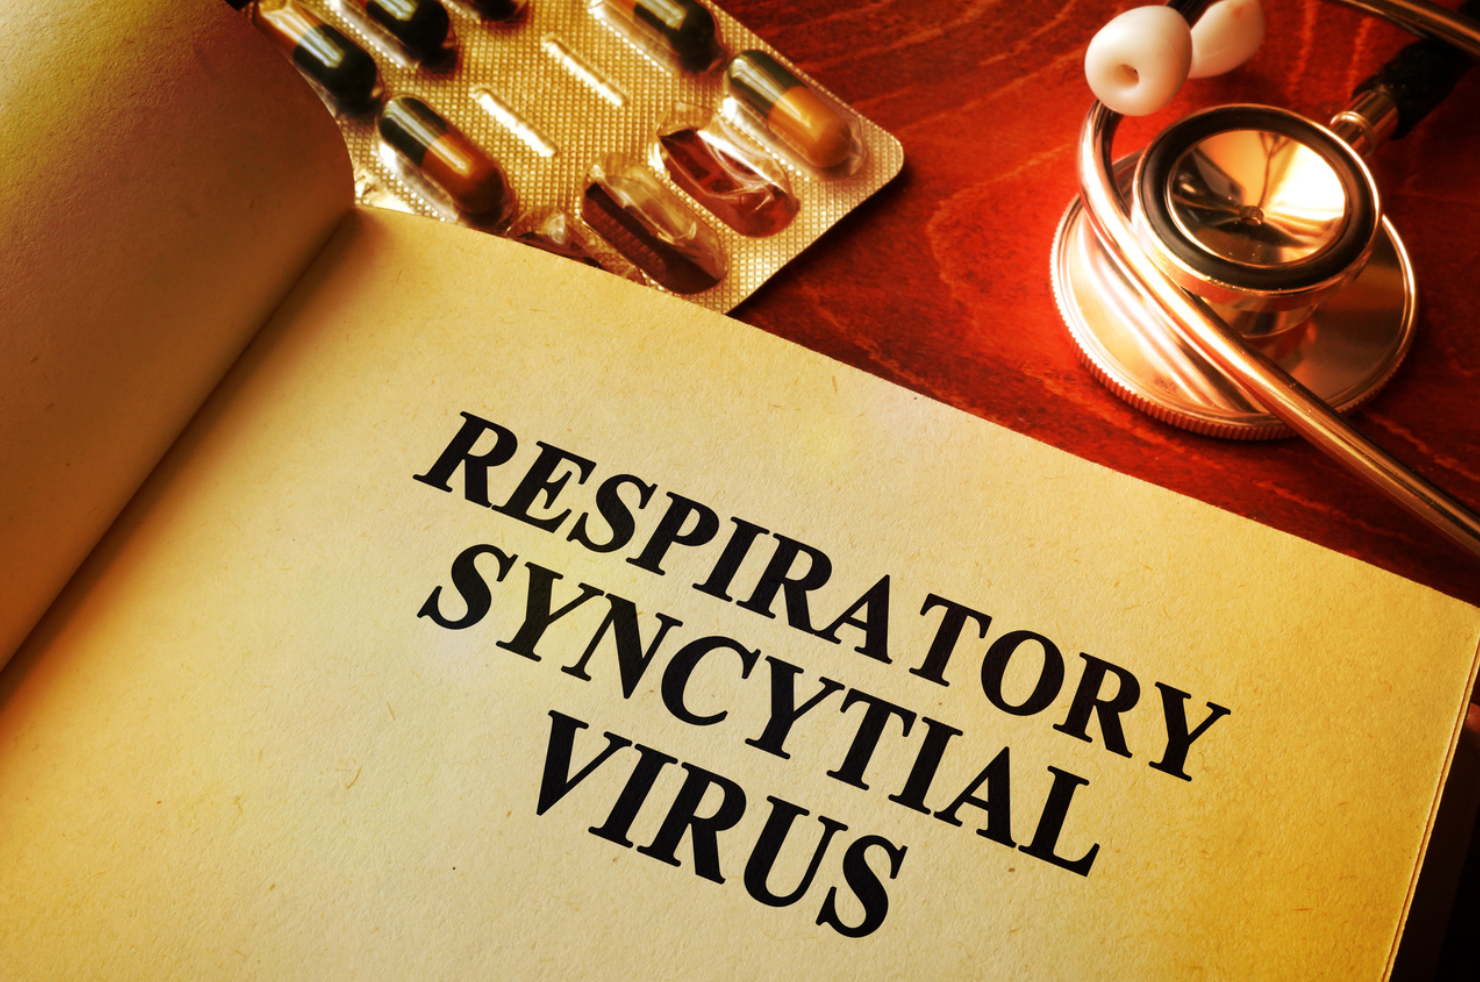 Respiratory Syncytial Virus Infection in the Pediatric Population